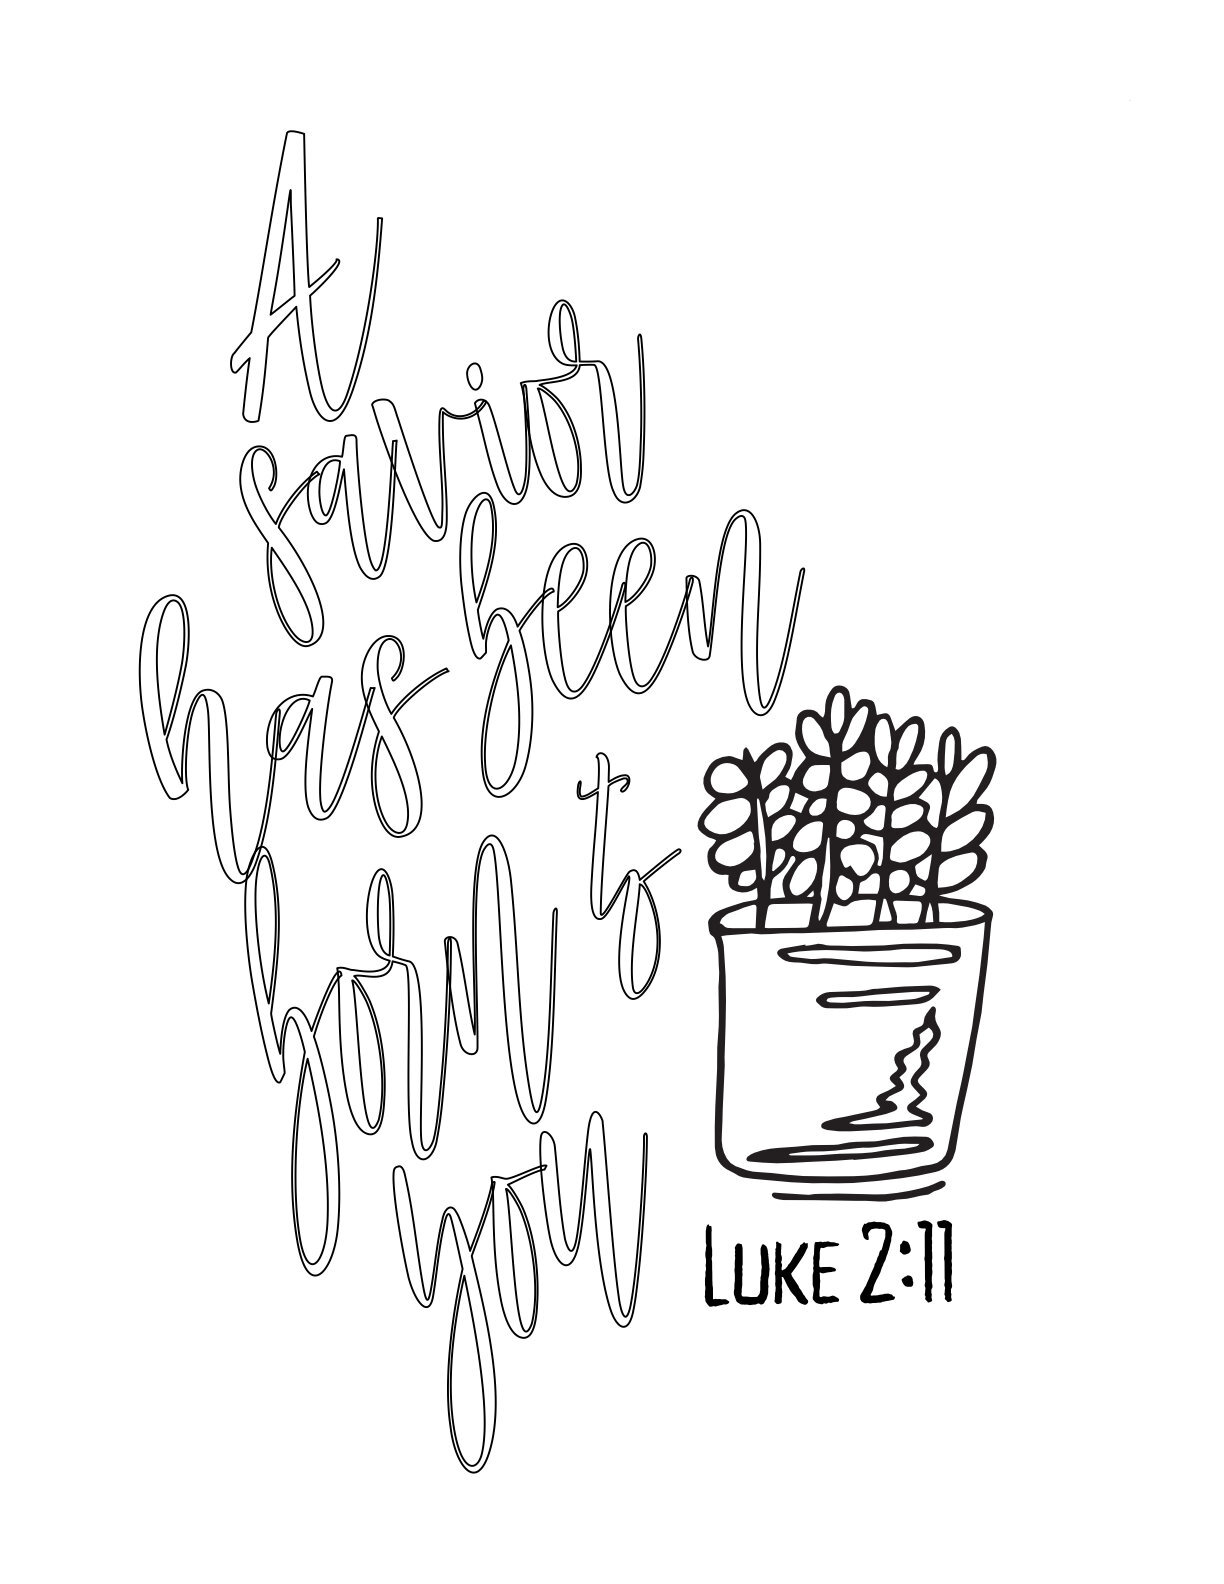 Free Printable Advent Coloring Page - A Savior Has Been Born To You - Luke 2:11  CLICK HERE TO DOWNLOAD YOUR FREE PRINTABLE CHRISTMAS COLORING SHEET